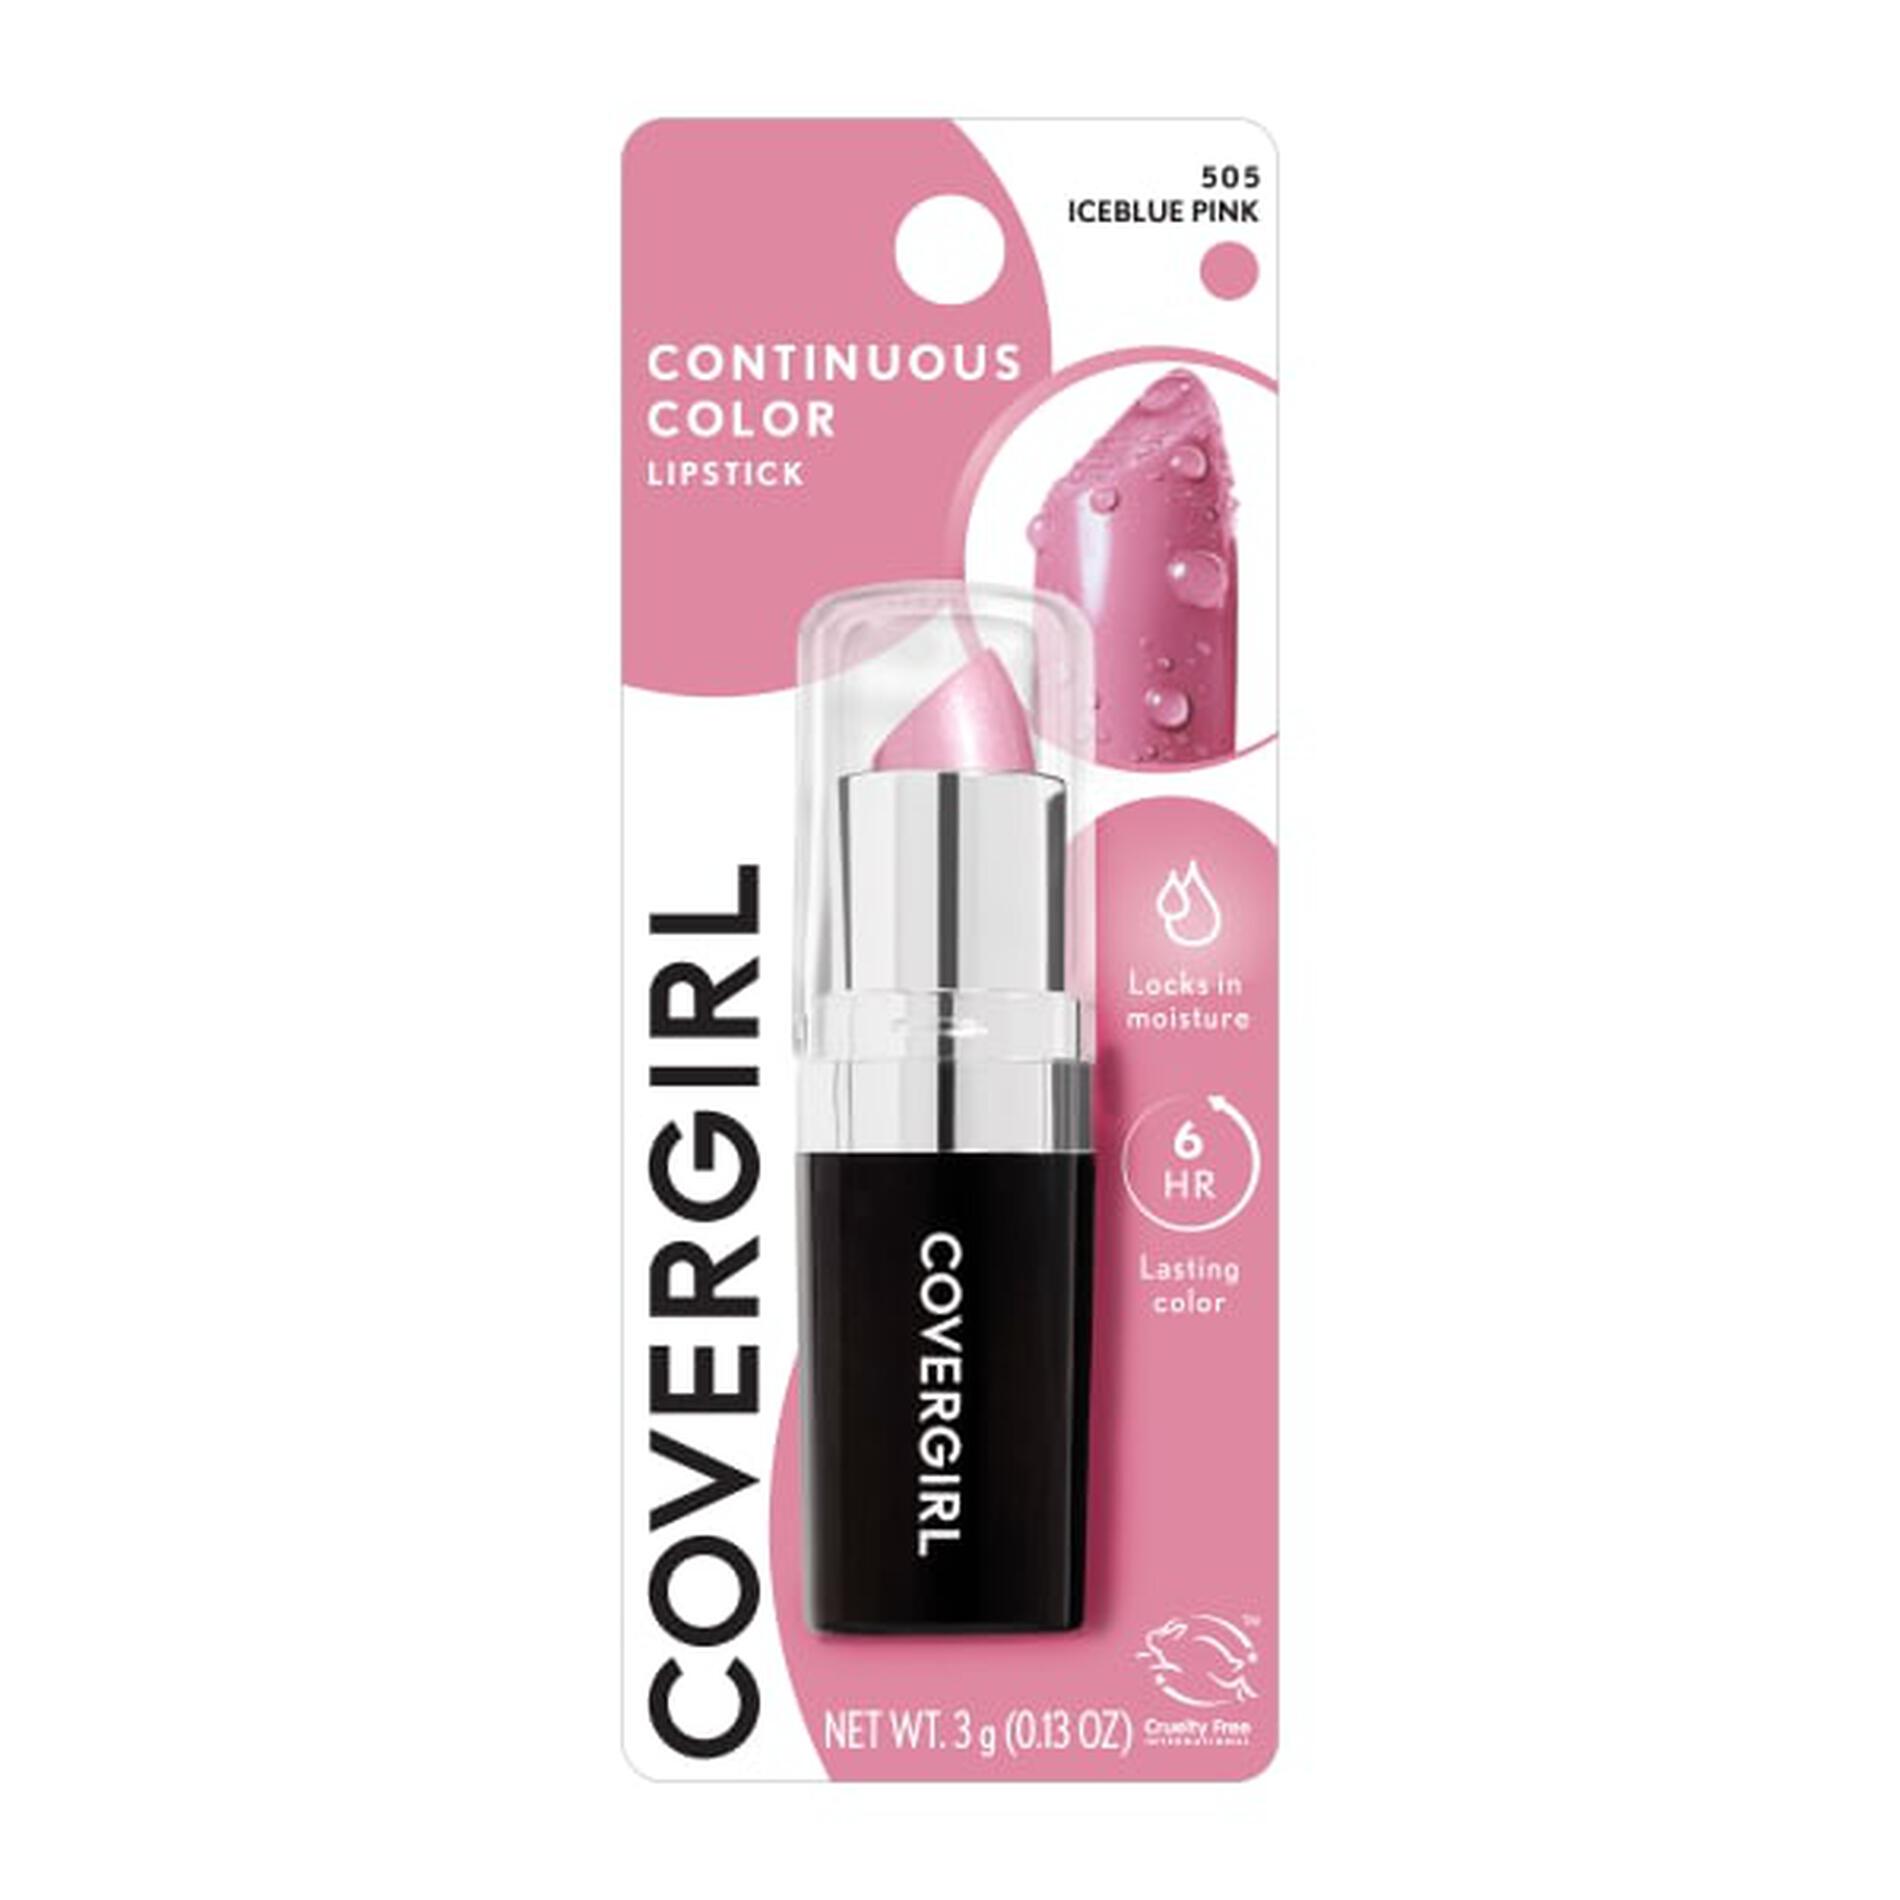 Cover Girl Continuous Color Lipstick - Iceblue Pink